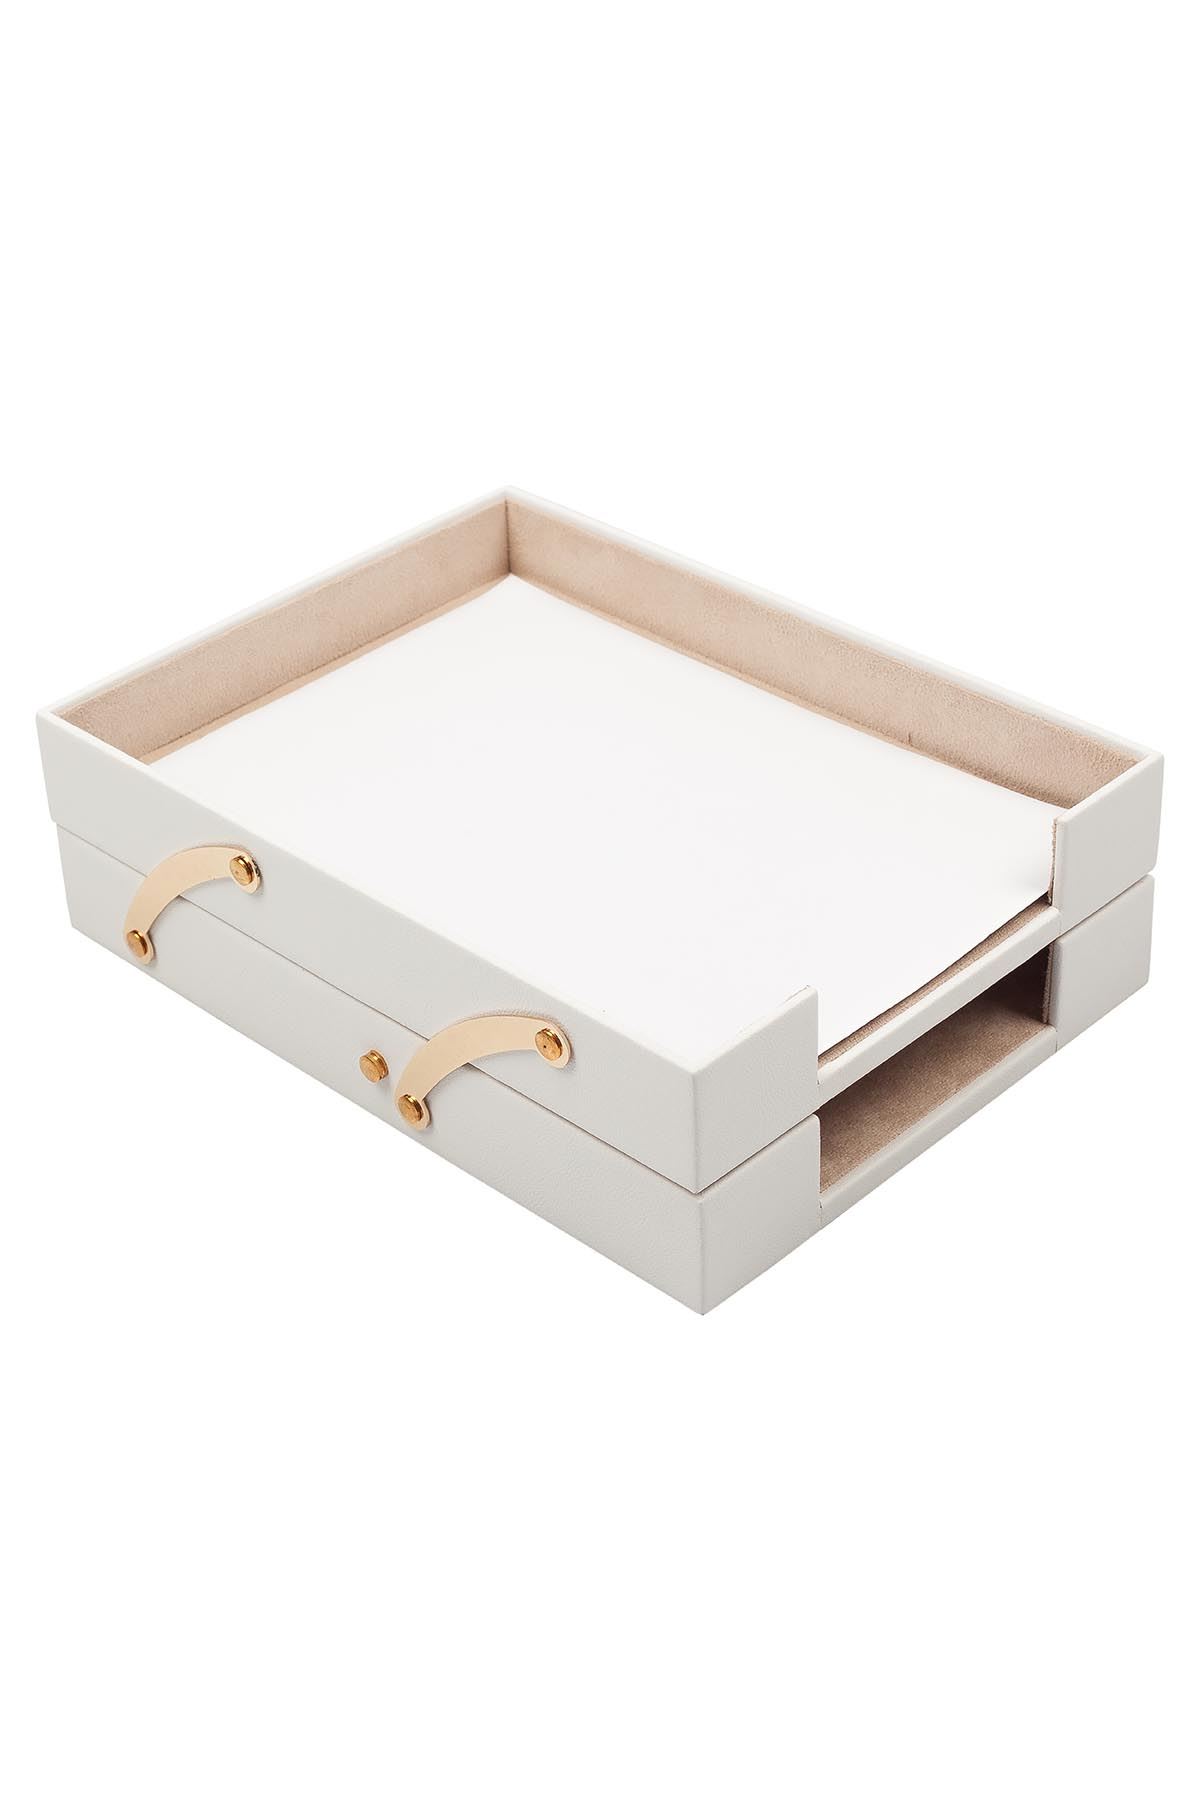 Double Document Tray White| Leather Document Organizer | Leather Foldable Tray | Leather Organizer | Double Document Shelves